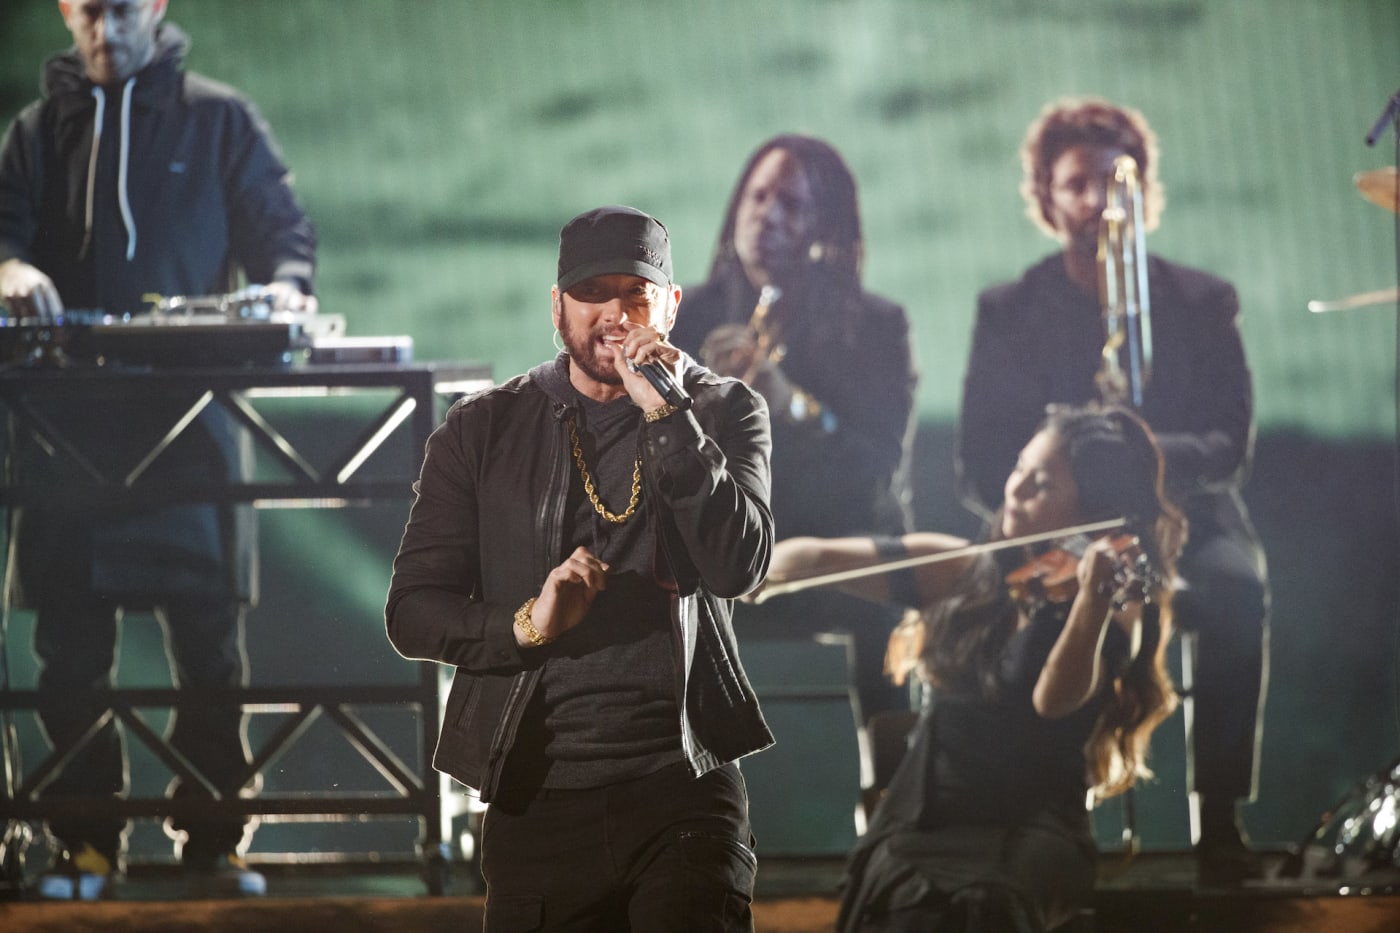 Eminem performs "Lose Yourself" at the 92nd Oscars.